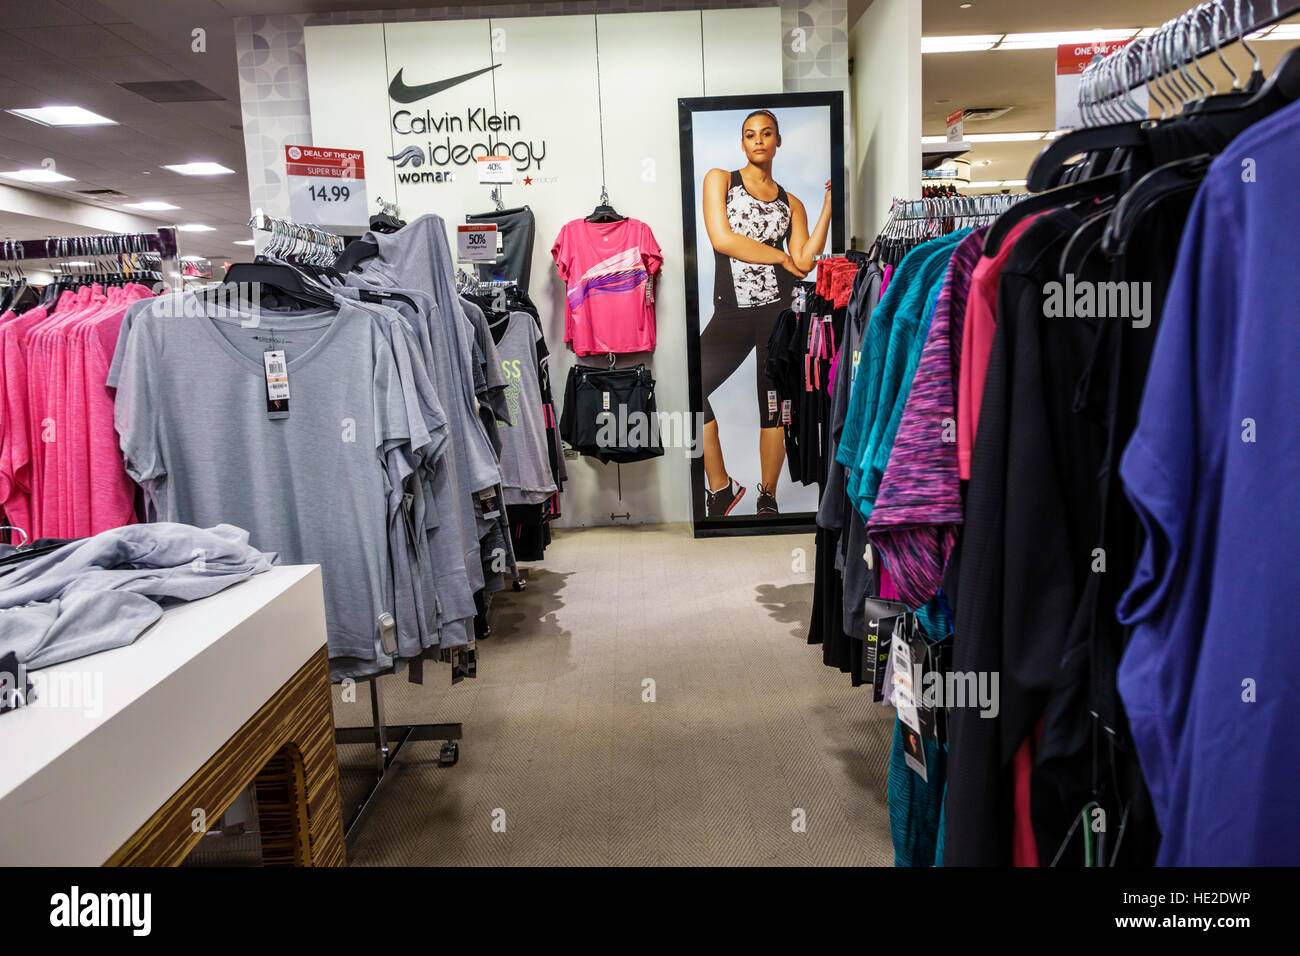 Nike Store Interior High Resolution Stock Photography and Images - Alamy